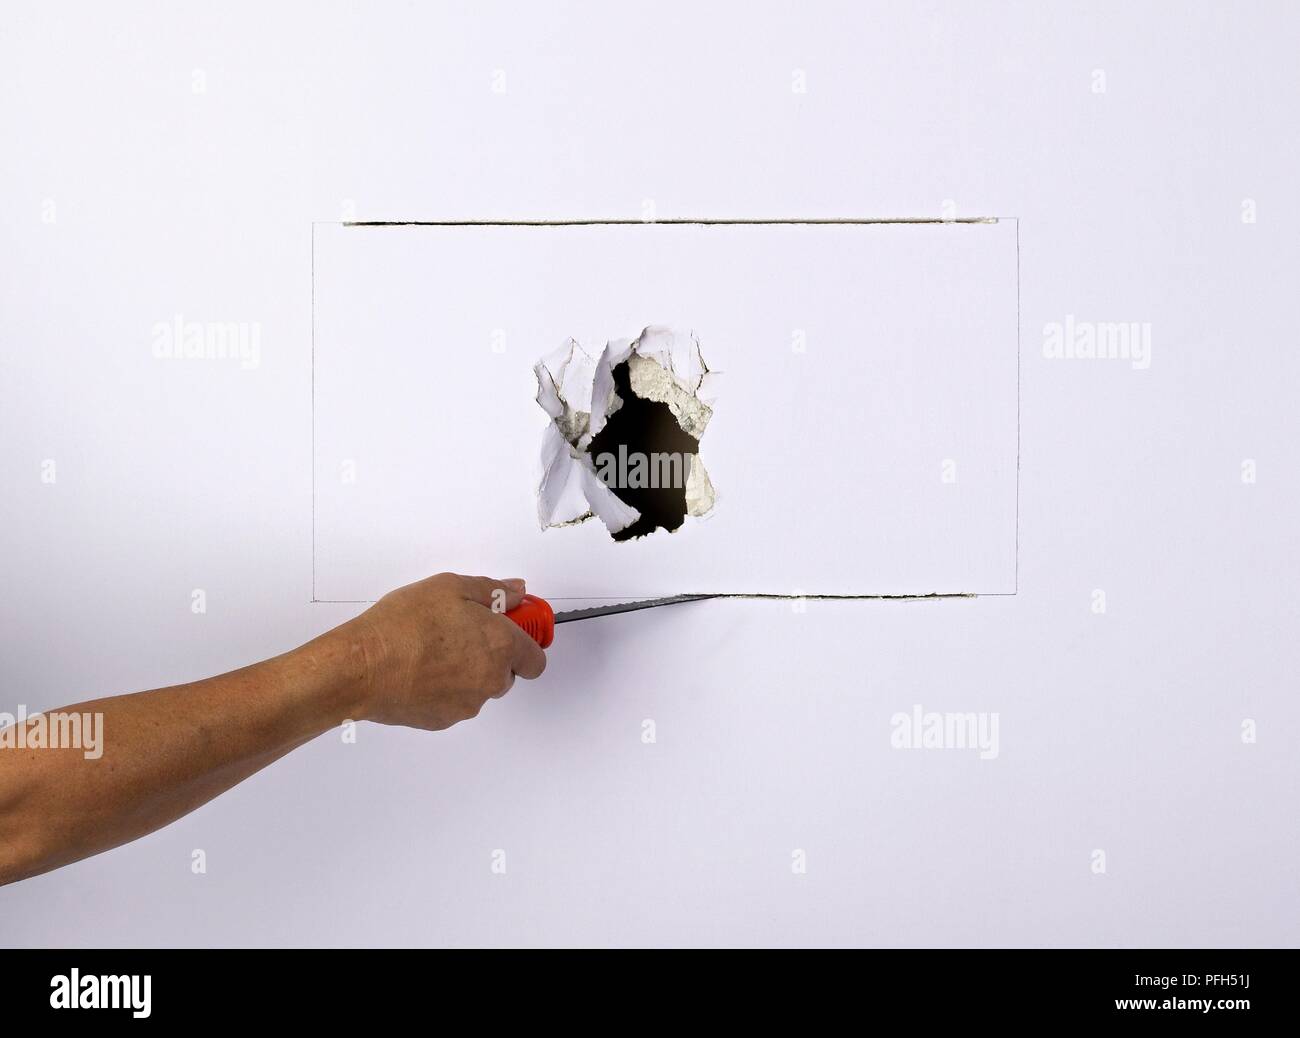 Hand cutting out section of damaged wall Stock Photo